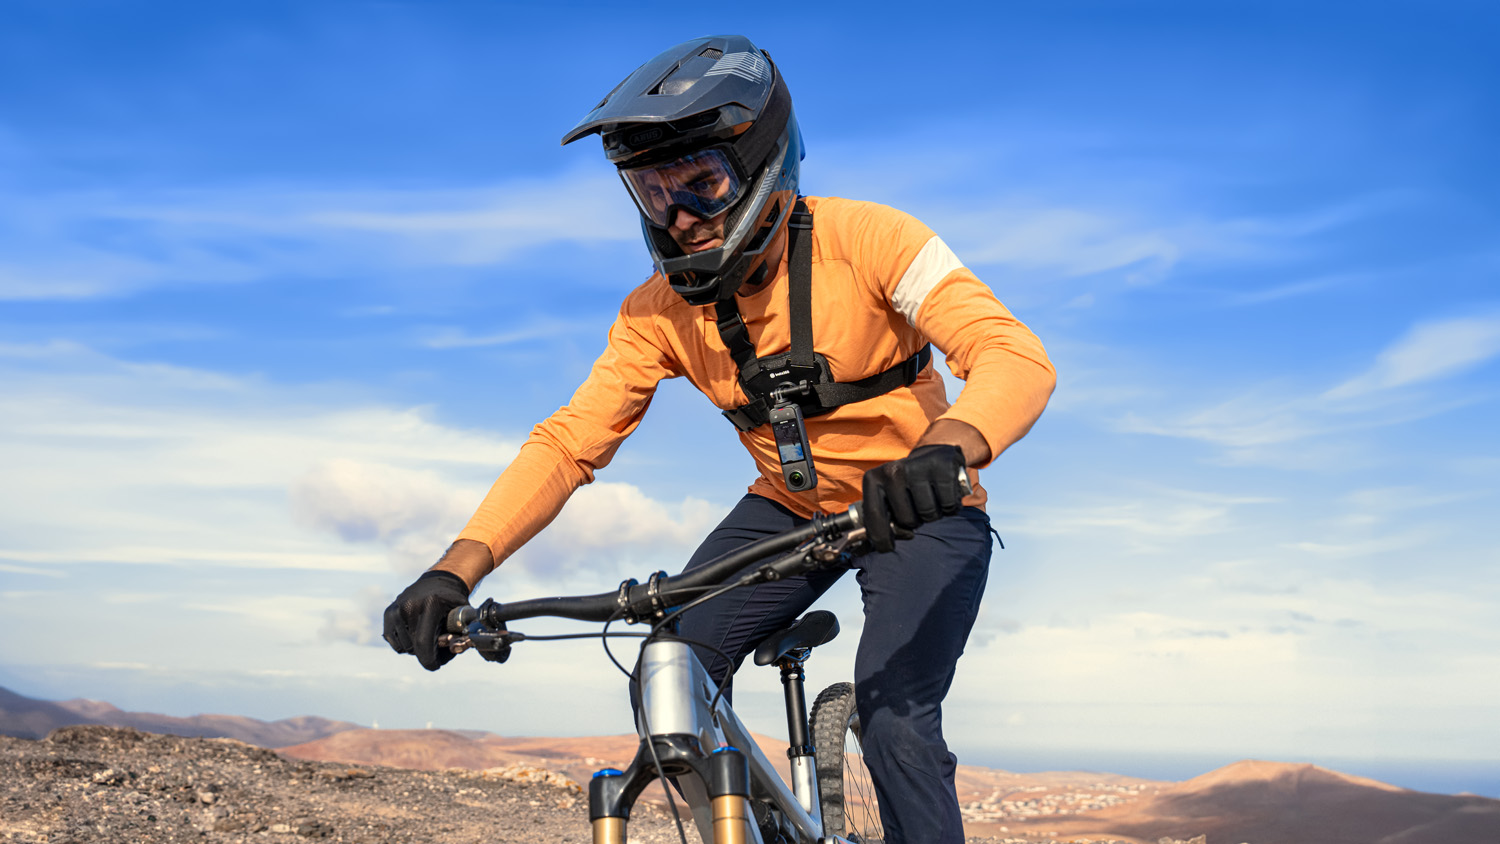 A mountain biker in an orange jersey and full-face helmet, riding on a rugged mountain trail with a 360-degree camera attached to his chest harness.